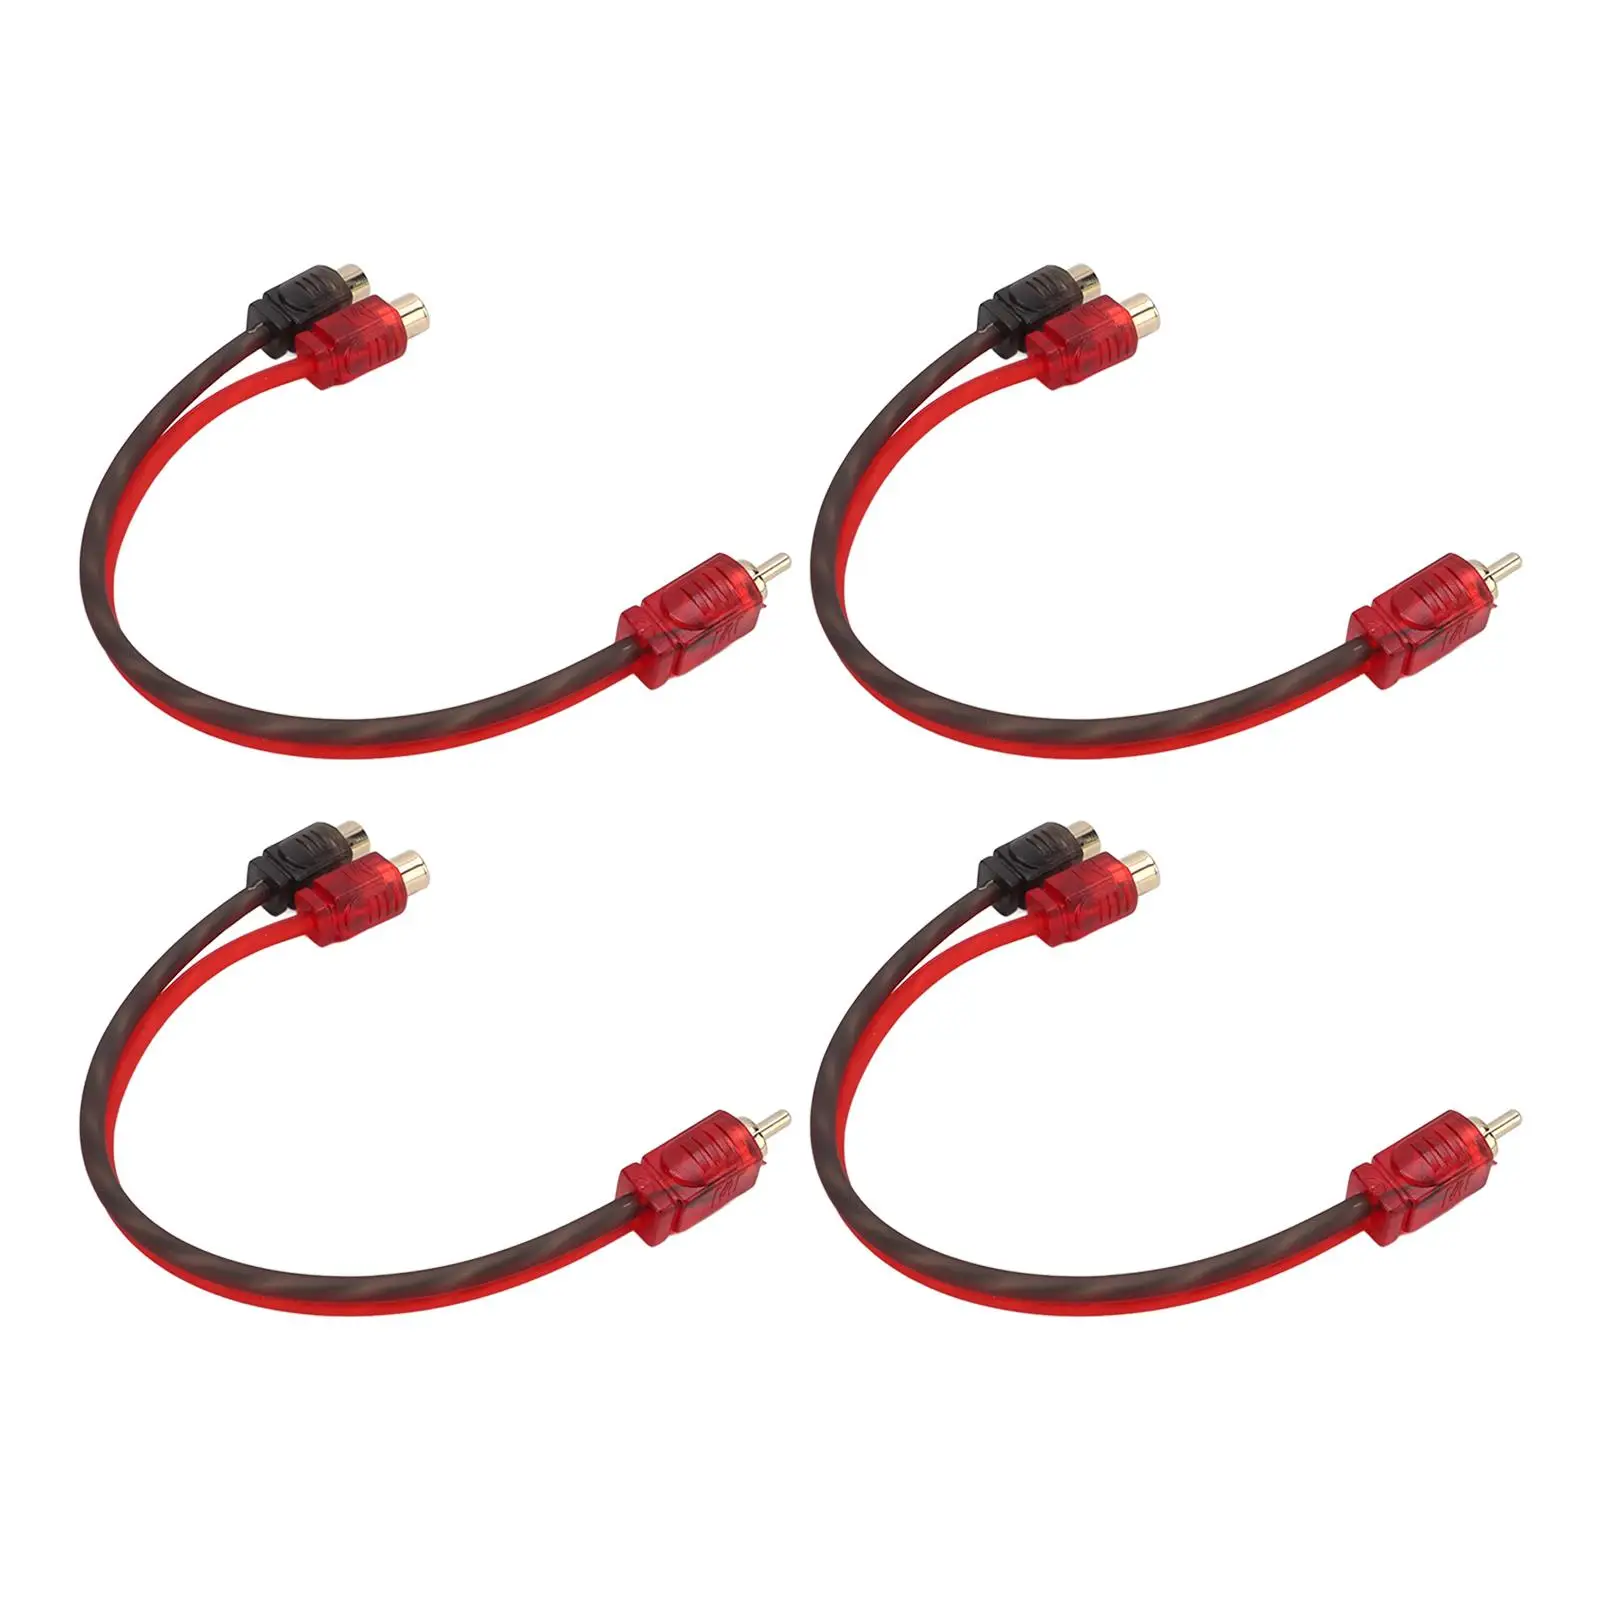 

4-Pack for car Stereo Y Splitter Cable Adapter 1 Male to 2 Female for Speaker System